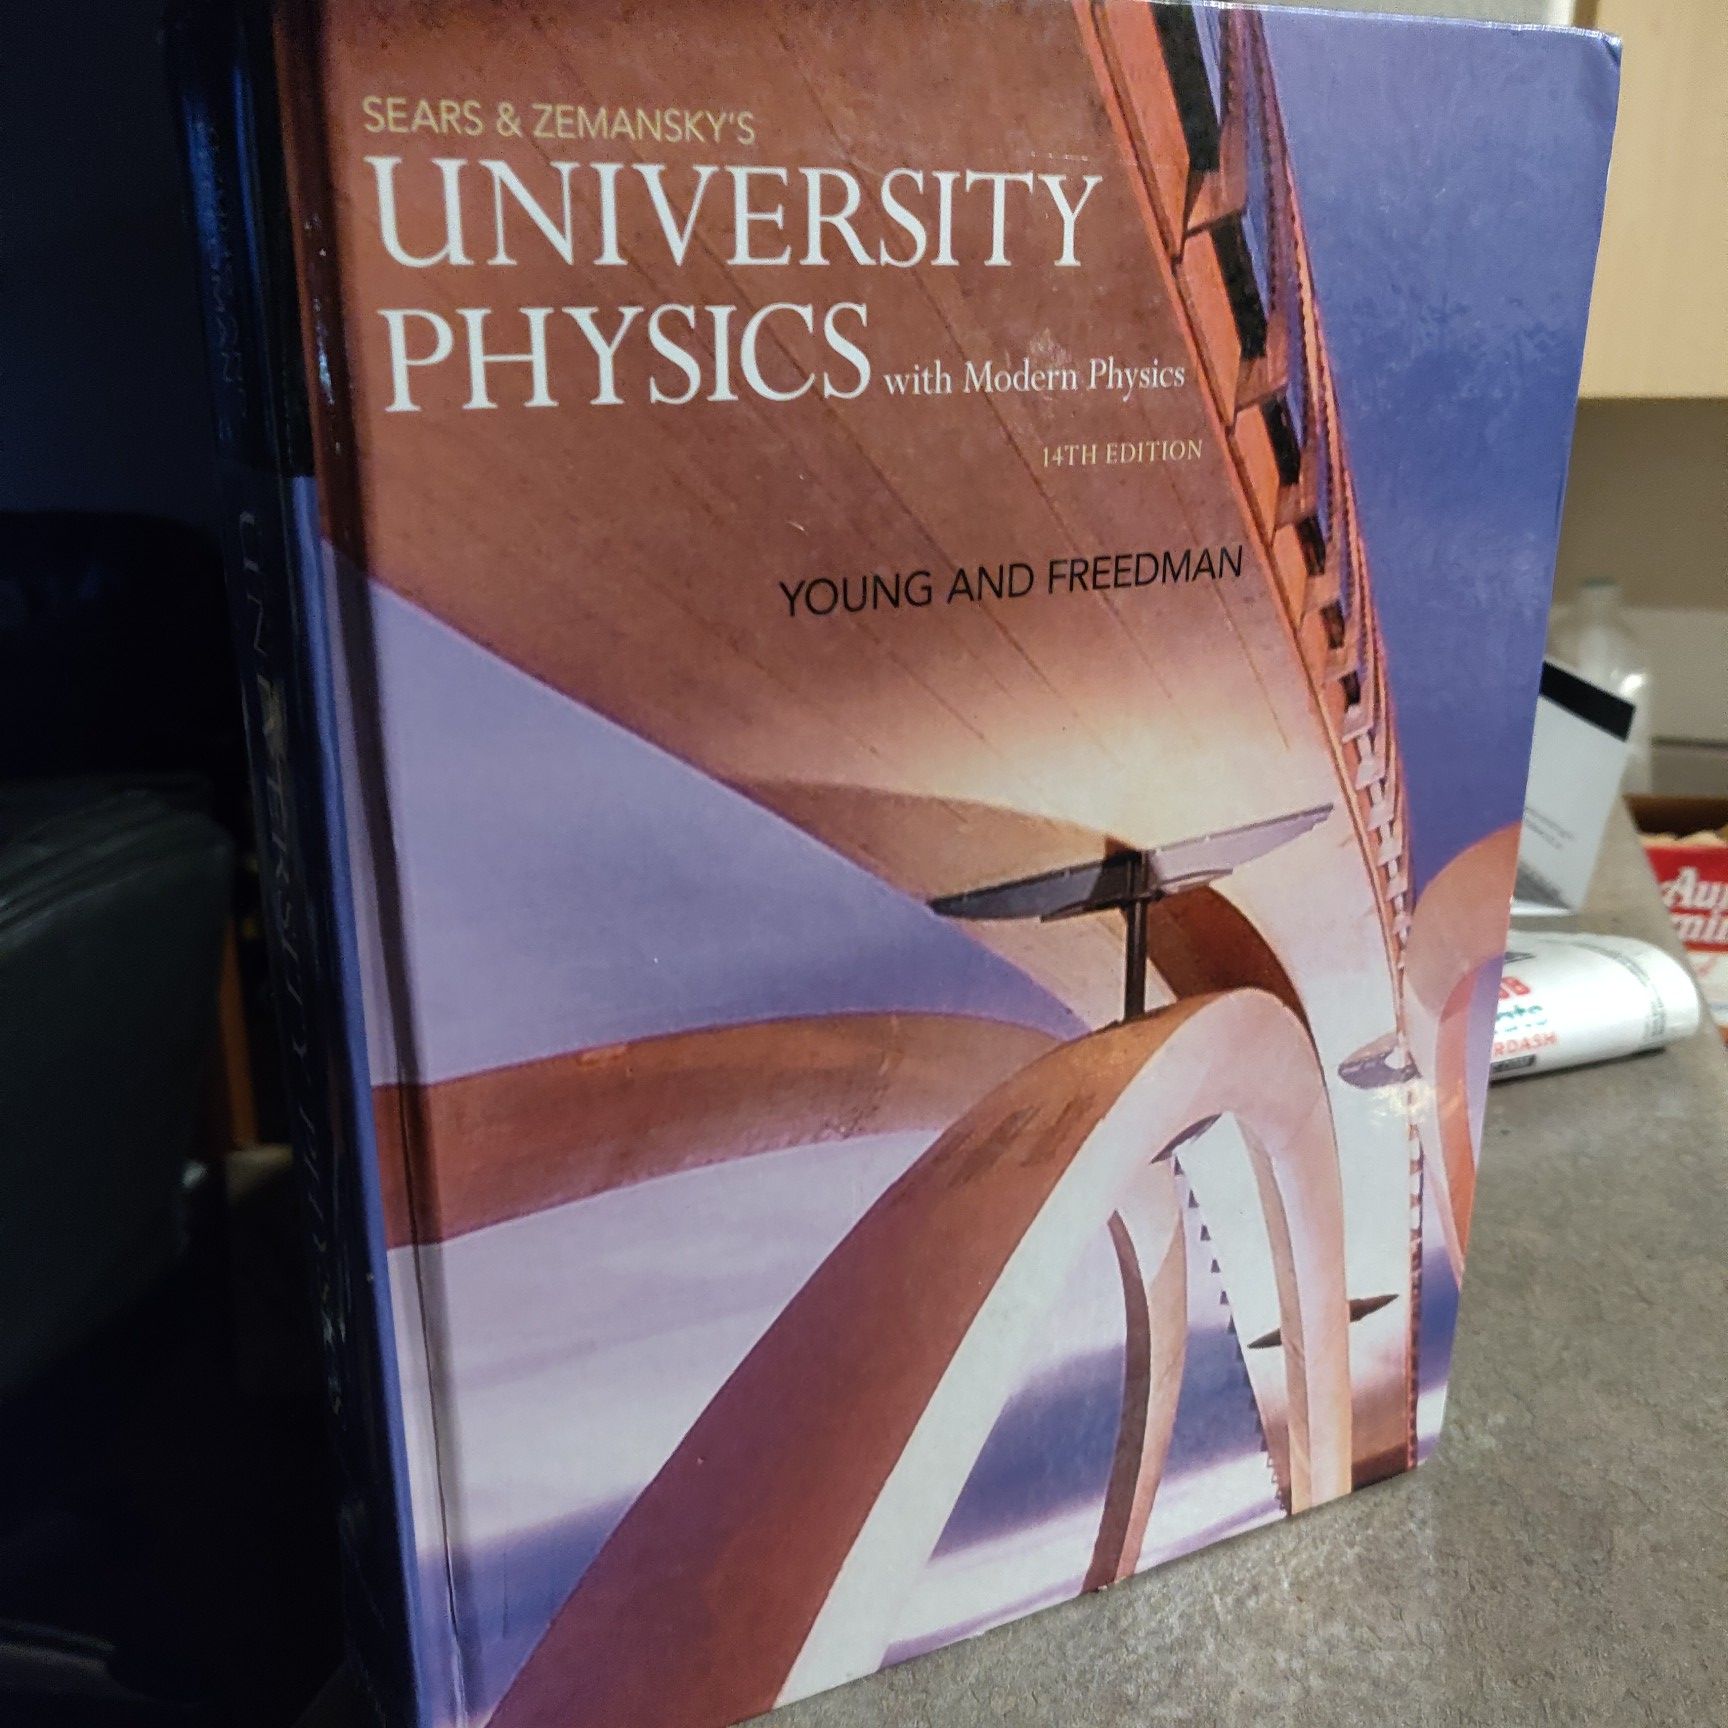 University Physics by Young and Freedman 14th edition